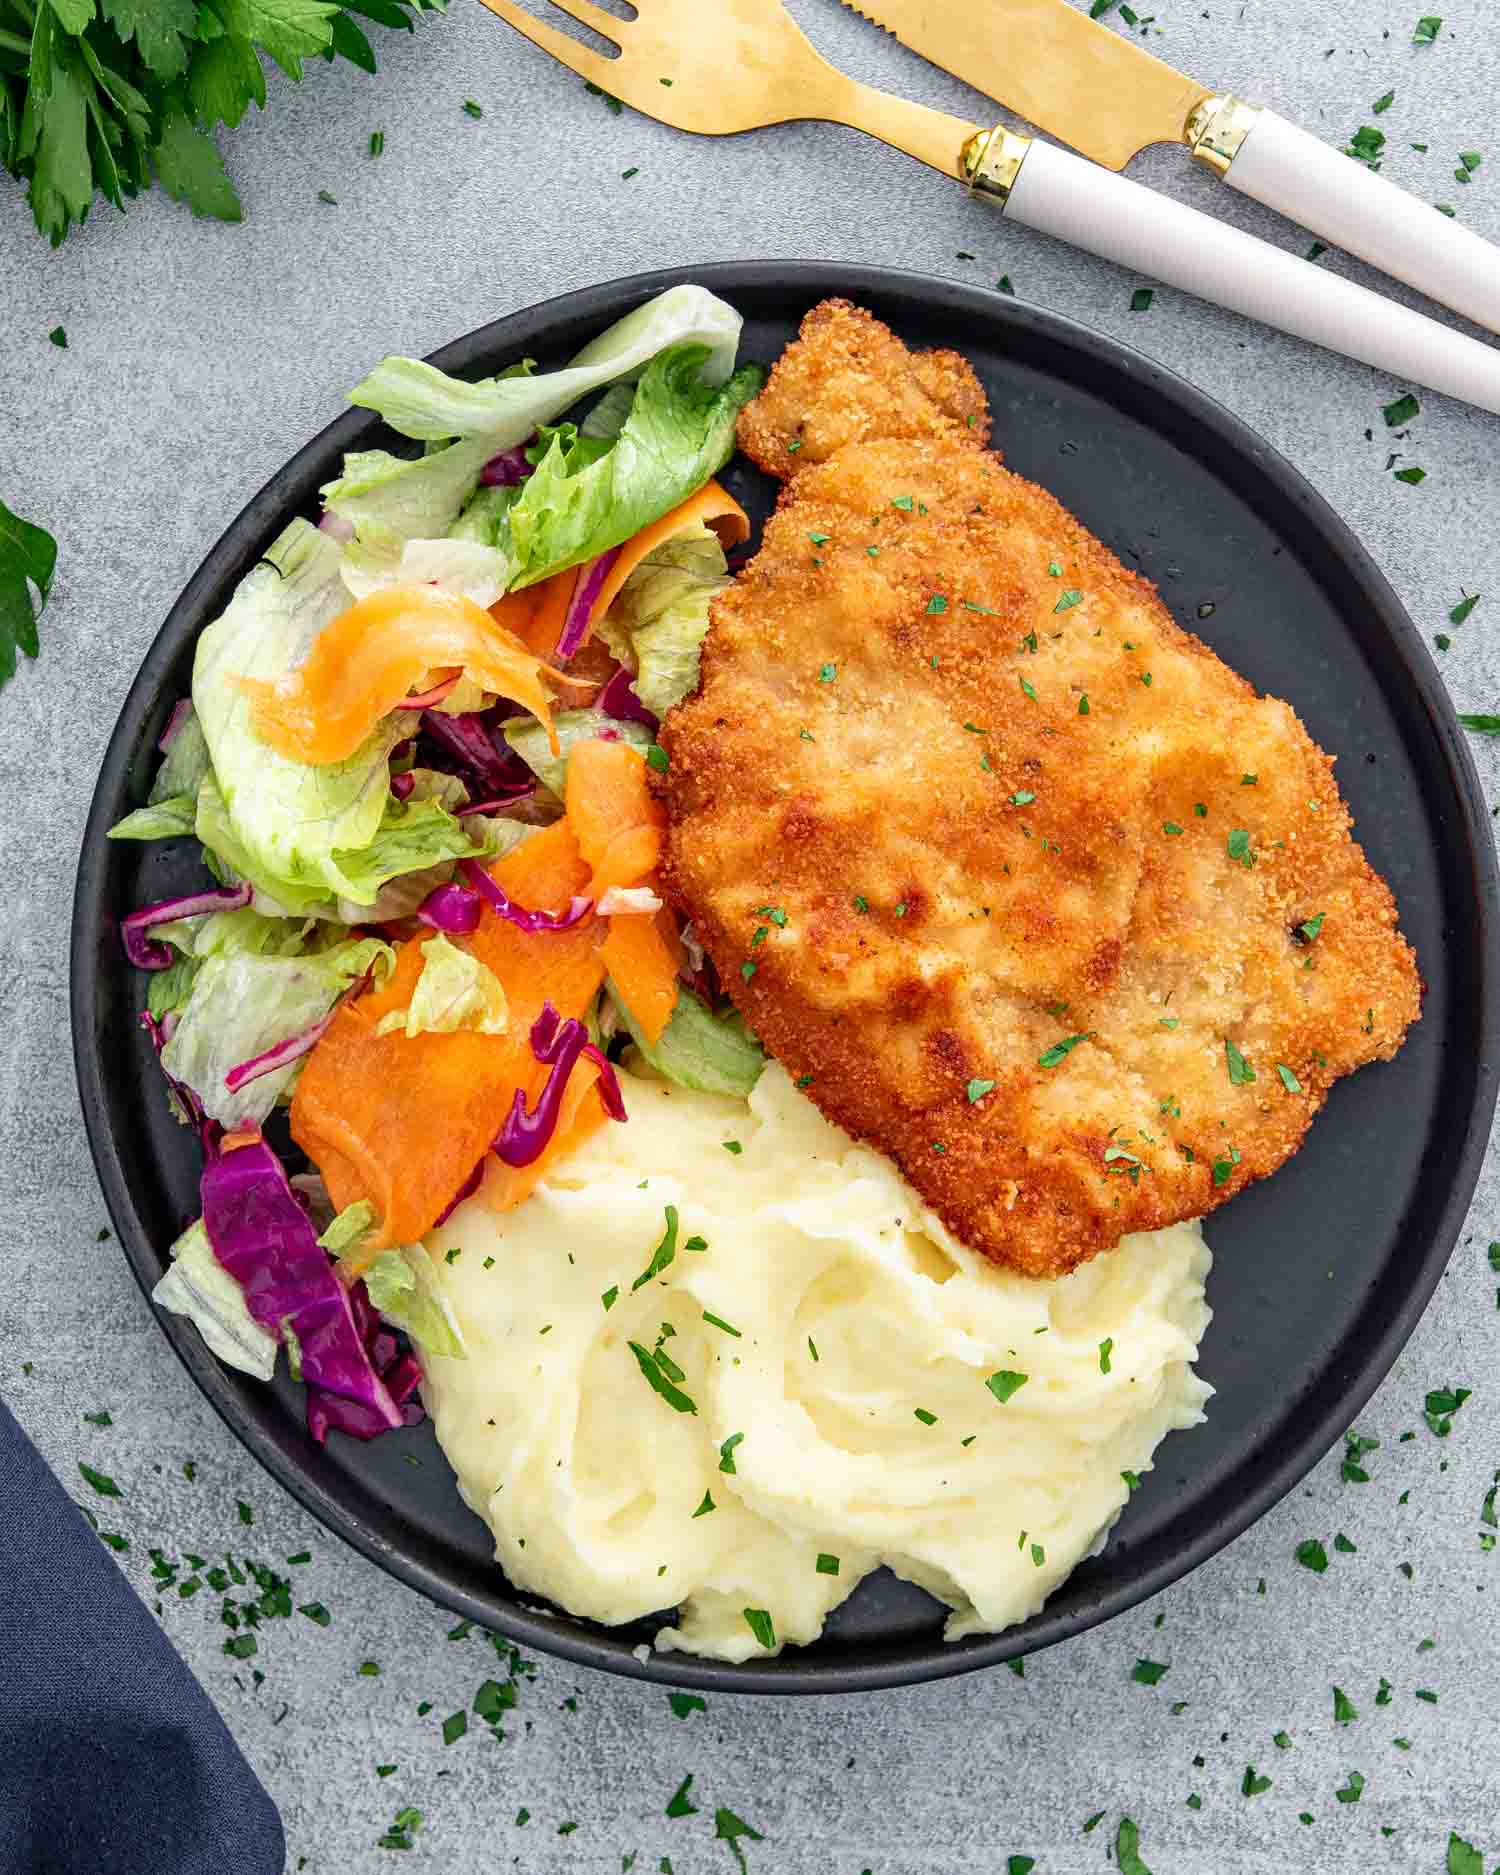 pork schnitzel with mashed potatoes and a tossed salad on a black plate.